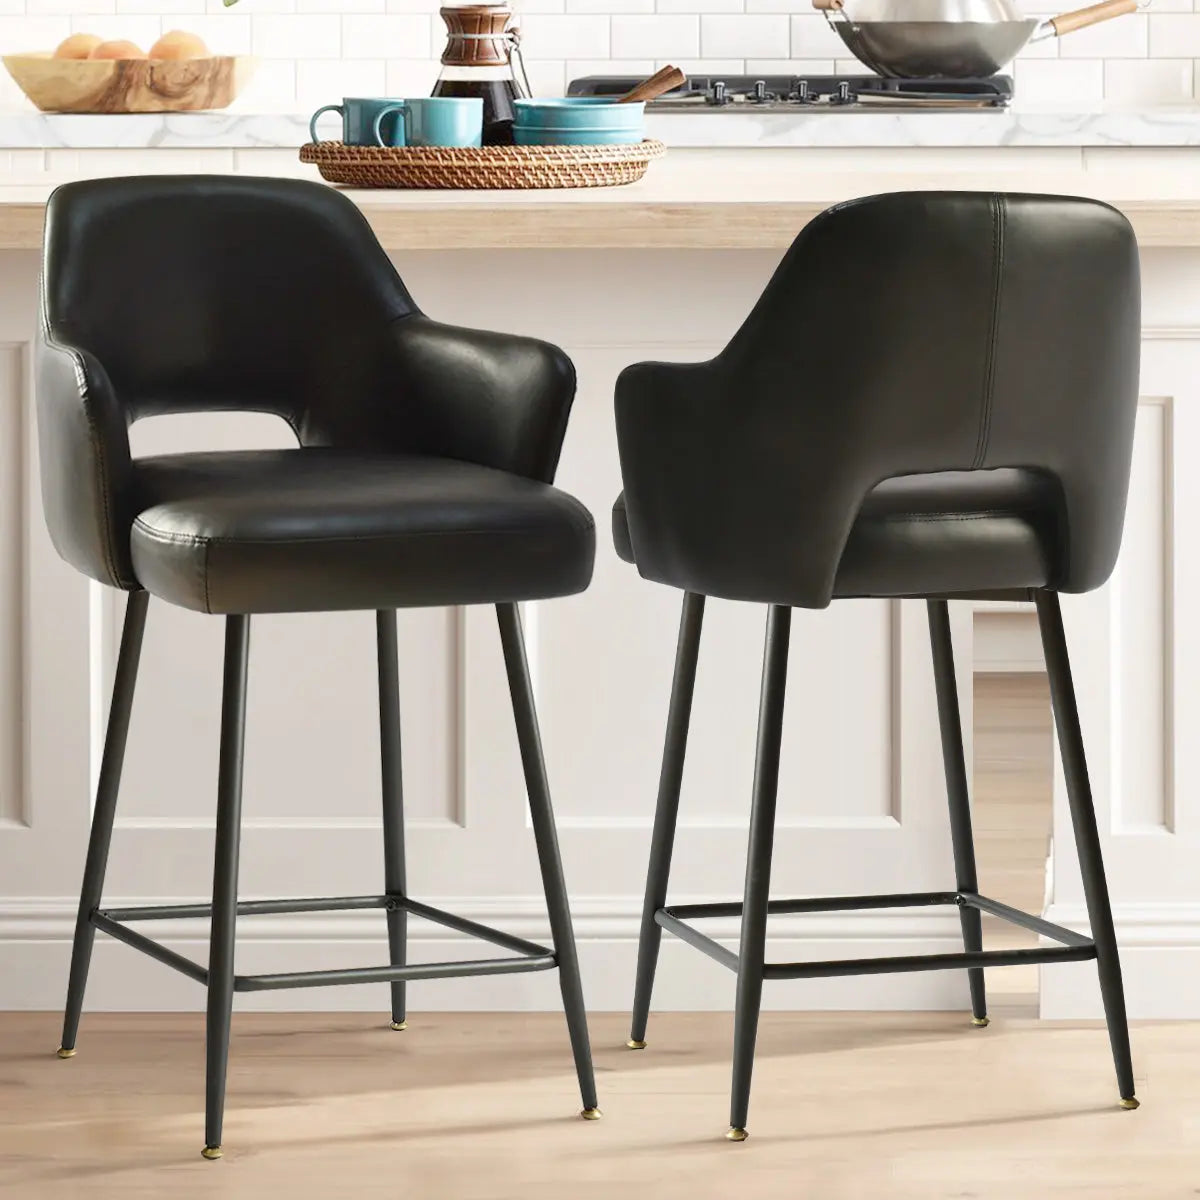 Edward Counter Stool, Faux Leather Seat with Armrest, Stools with Black Metal Legs, A Stool Set of 2